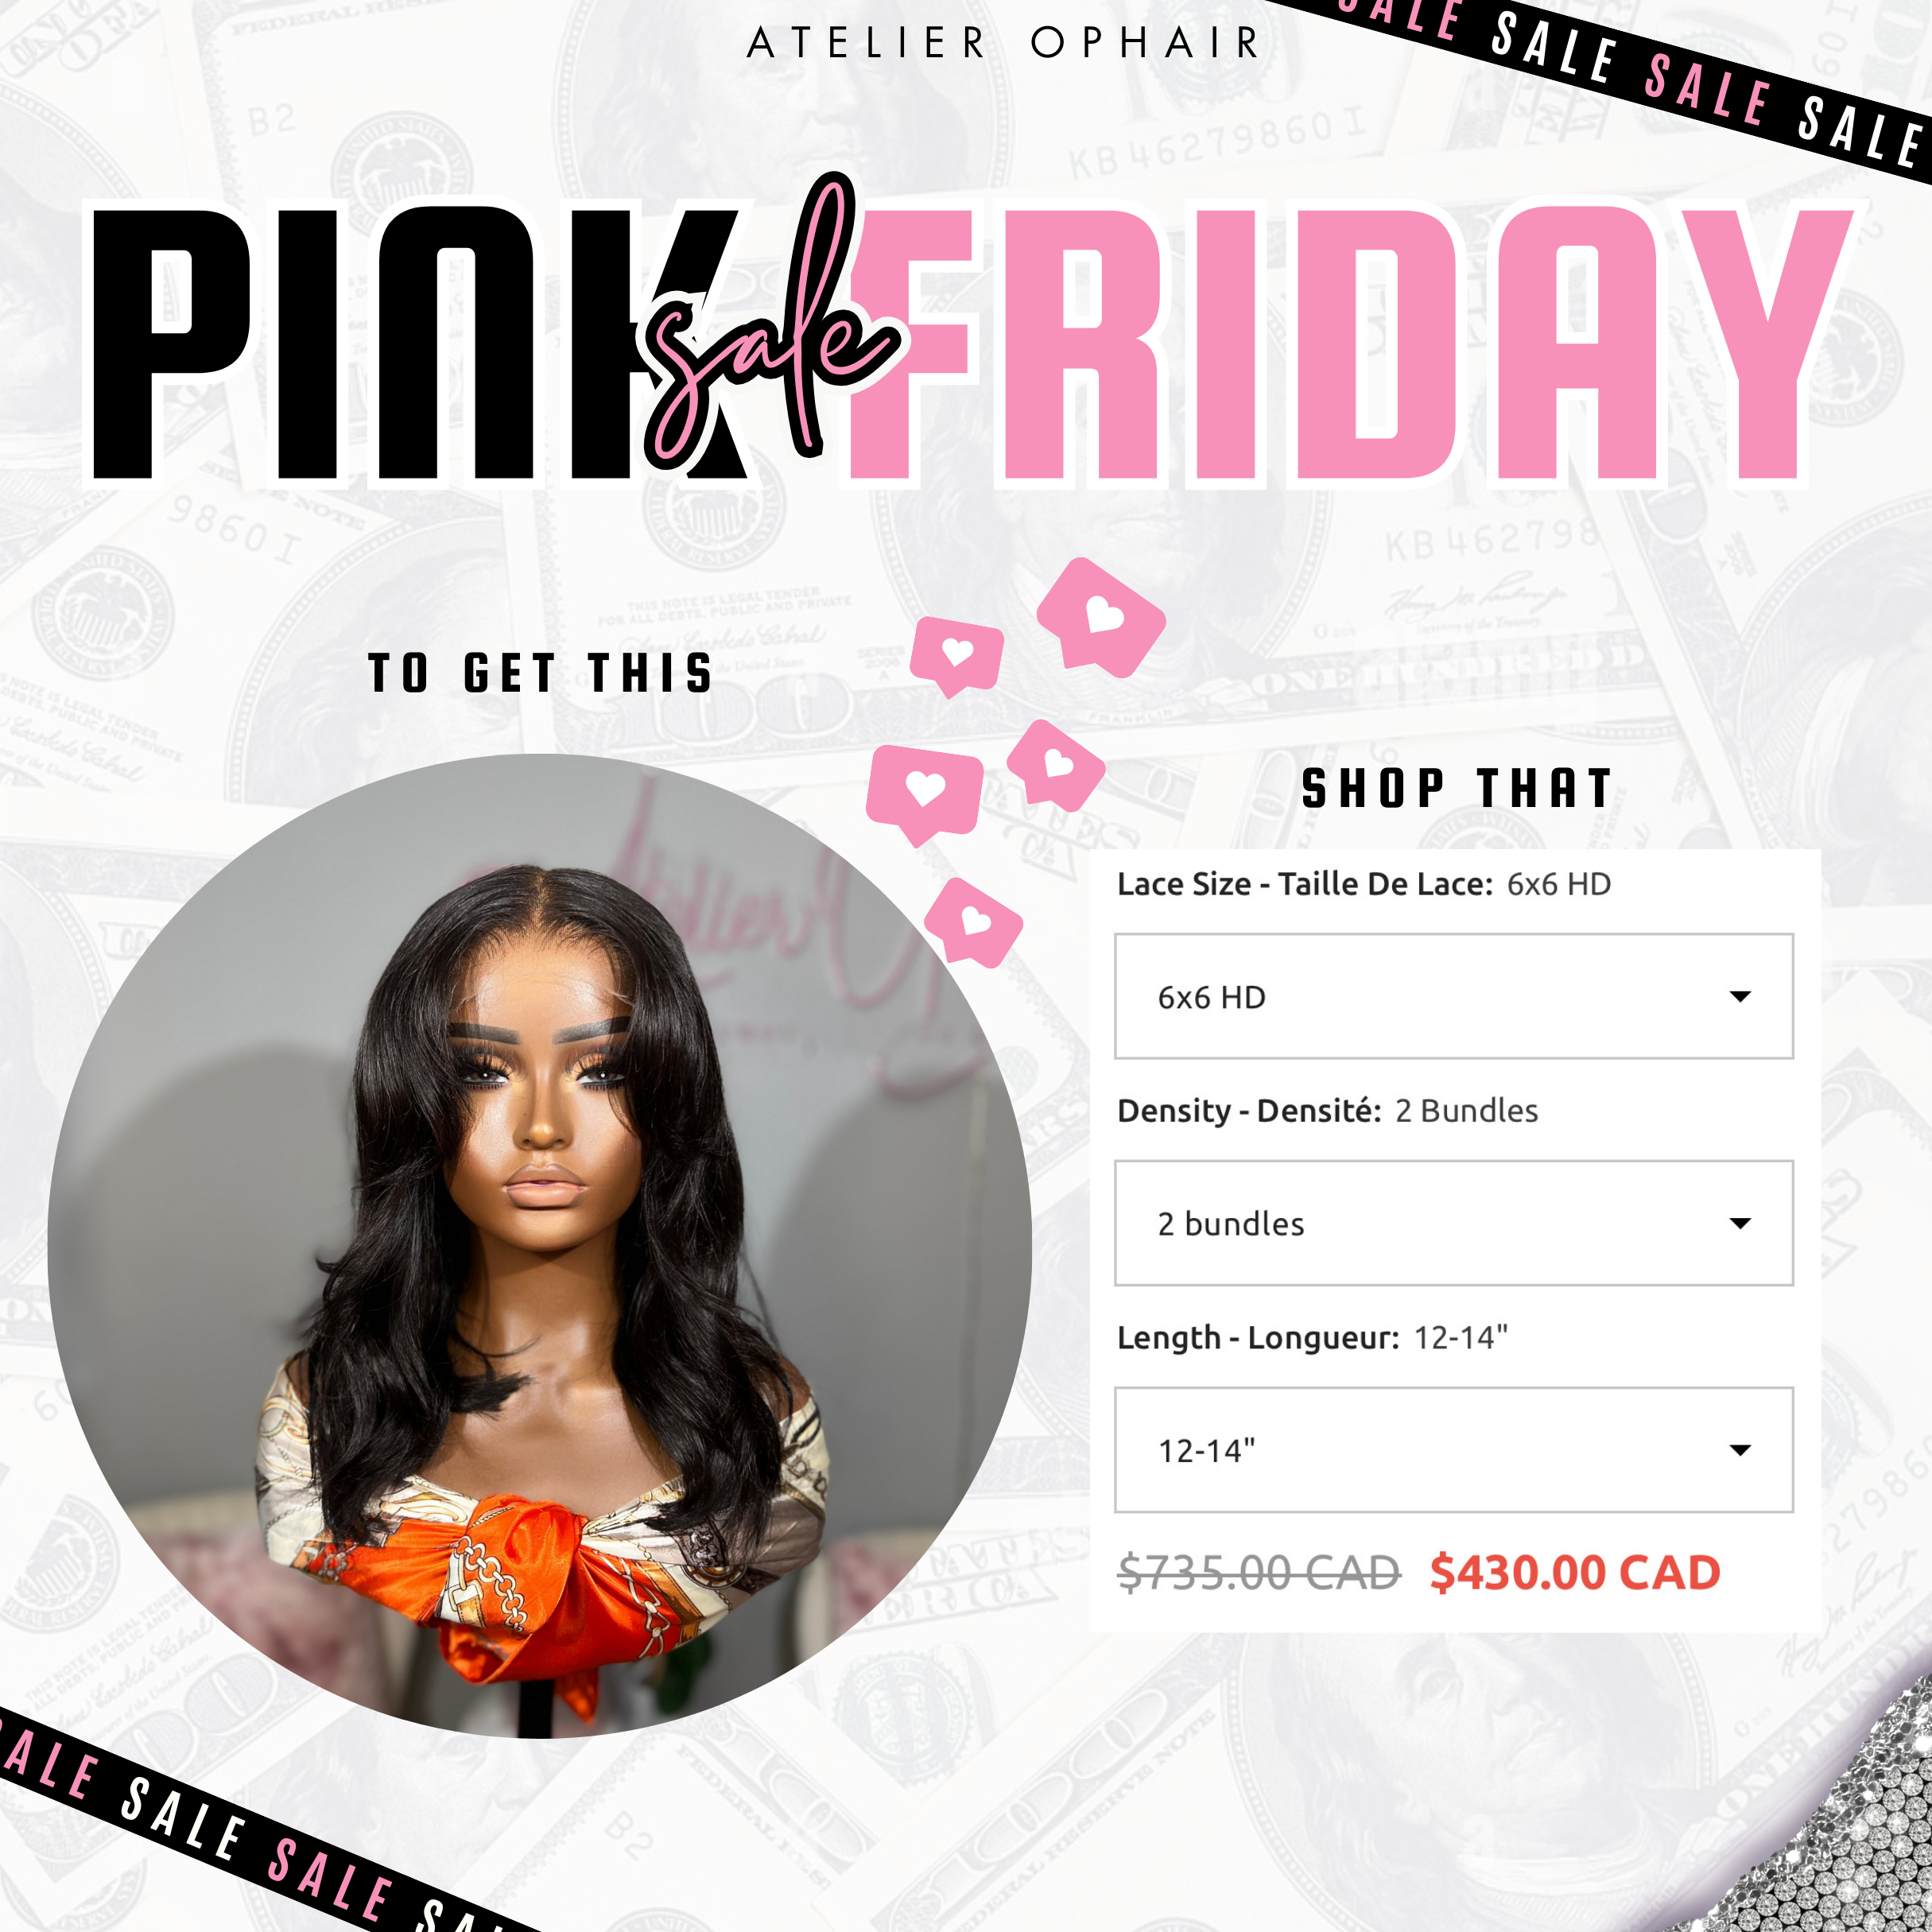 Pink Friday - Raw classic unit Pre-Order - All sizes, 5 lengths